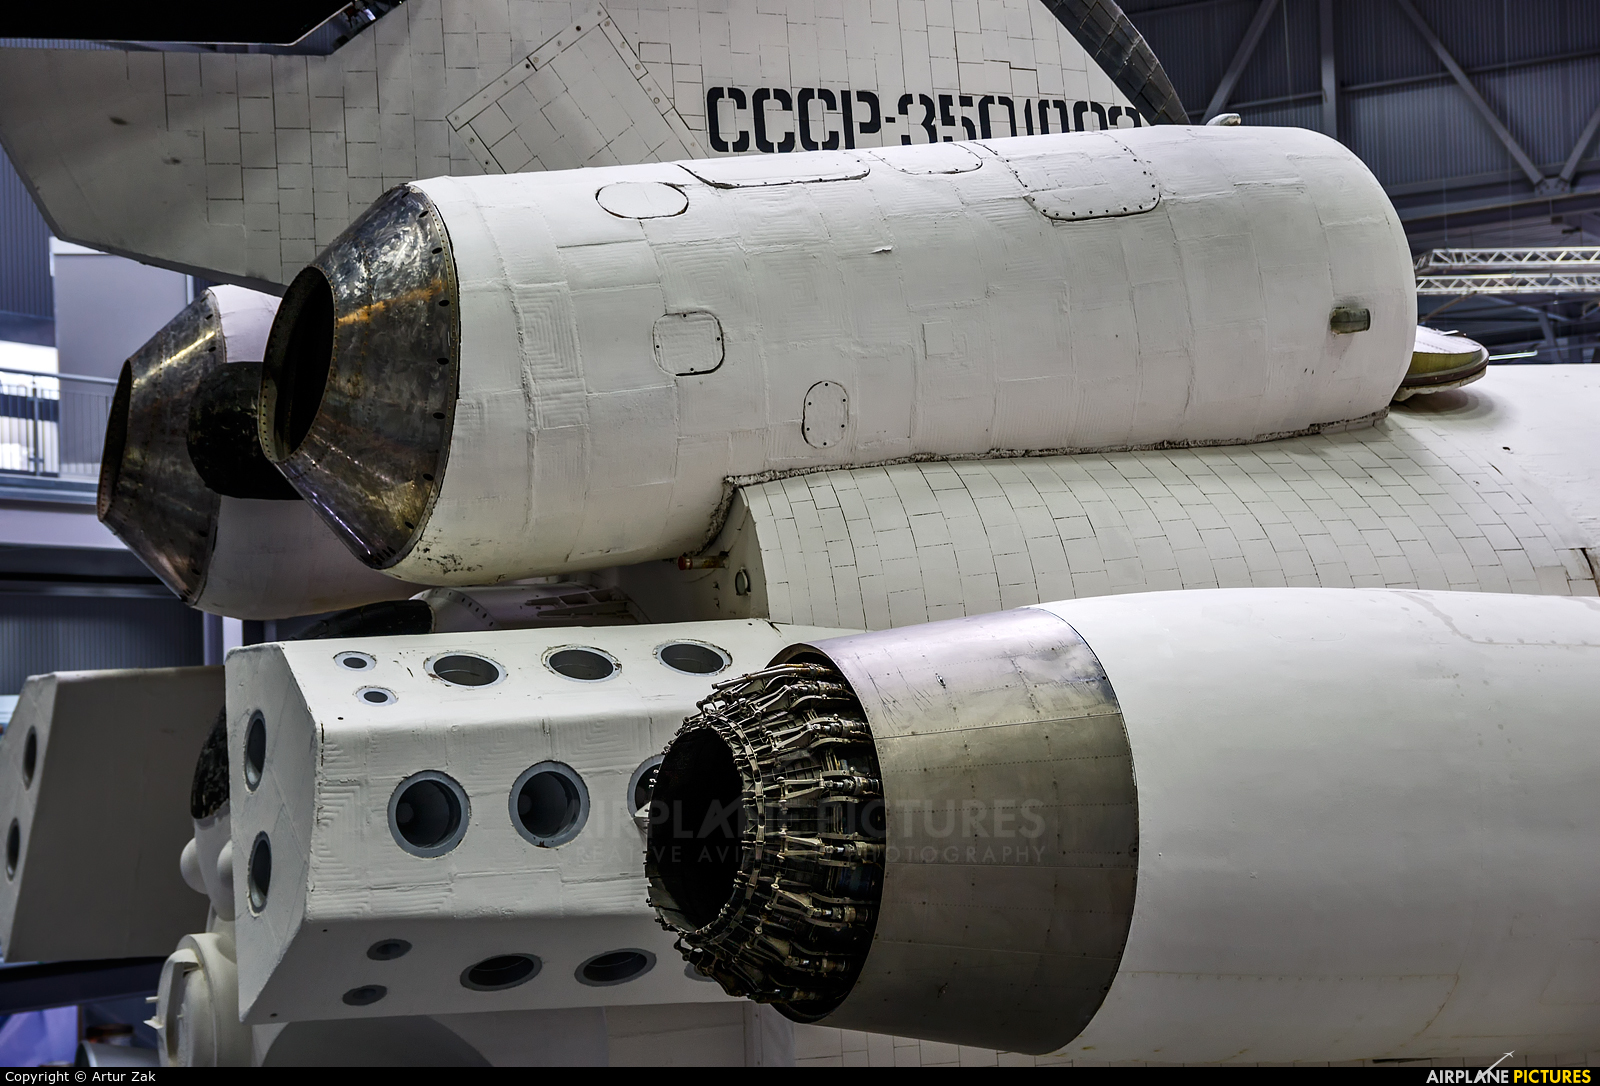 Russian Space Agency CCCP-3501002 aircraft at Speyer, Technikmuseum